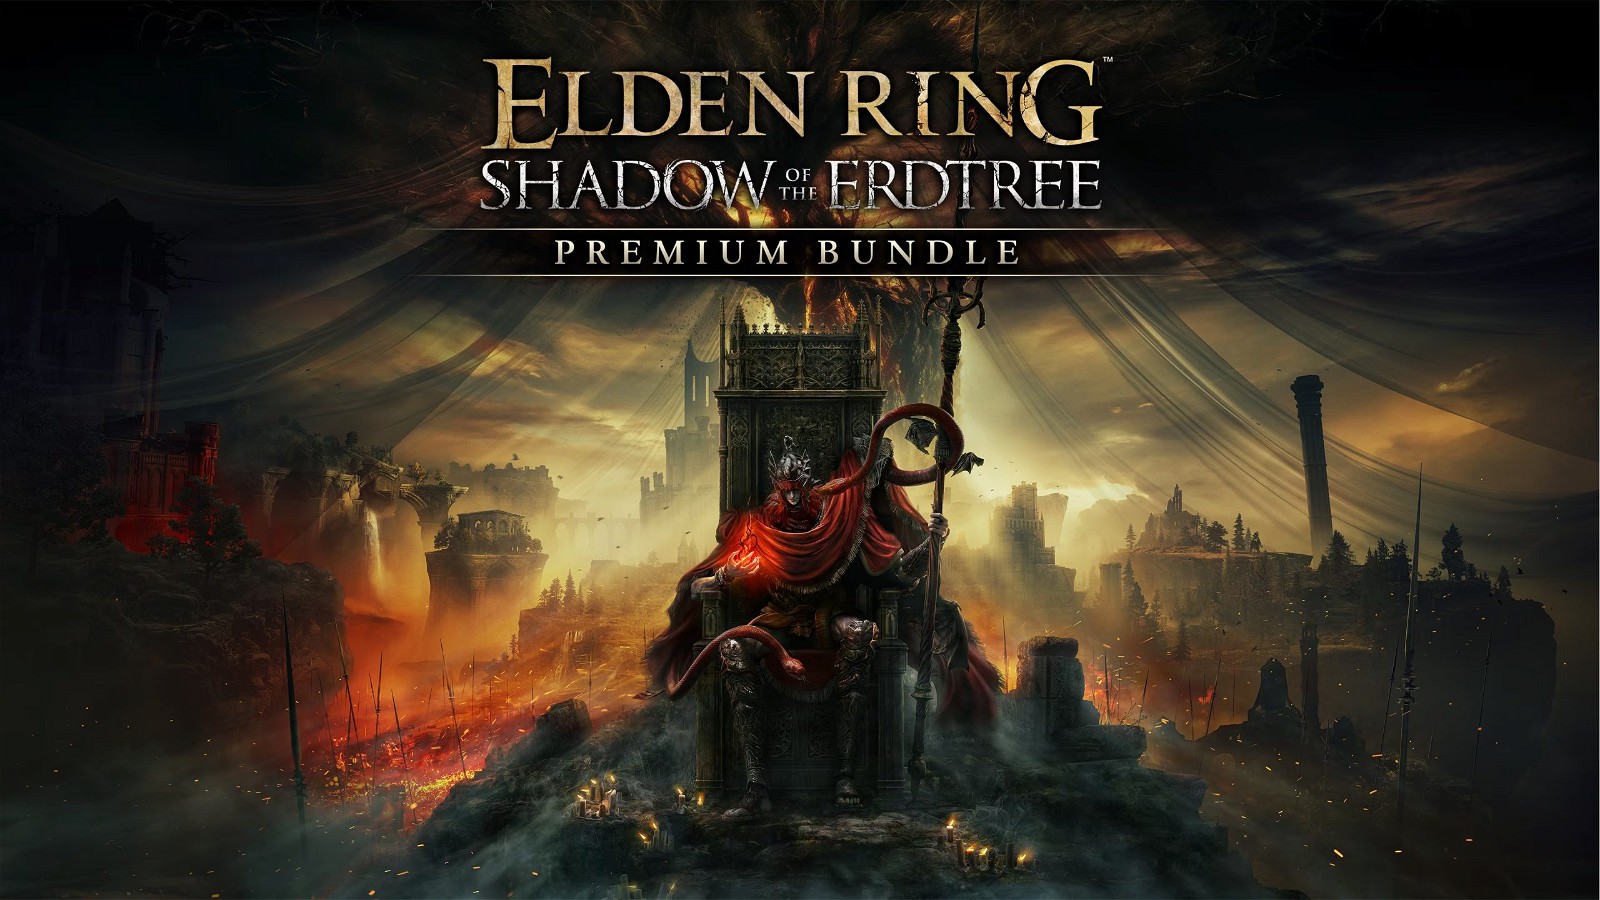 Elden Ring: Shadow of the Erdtree launches on June 30, 2024